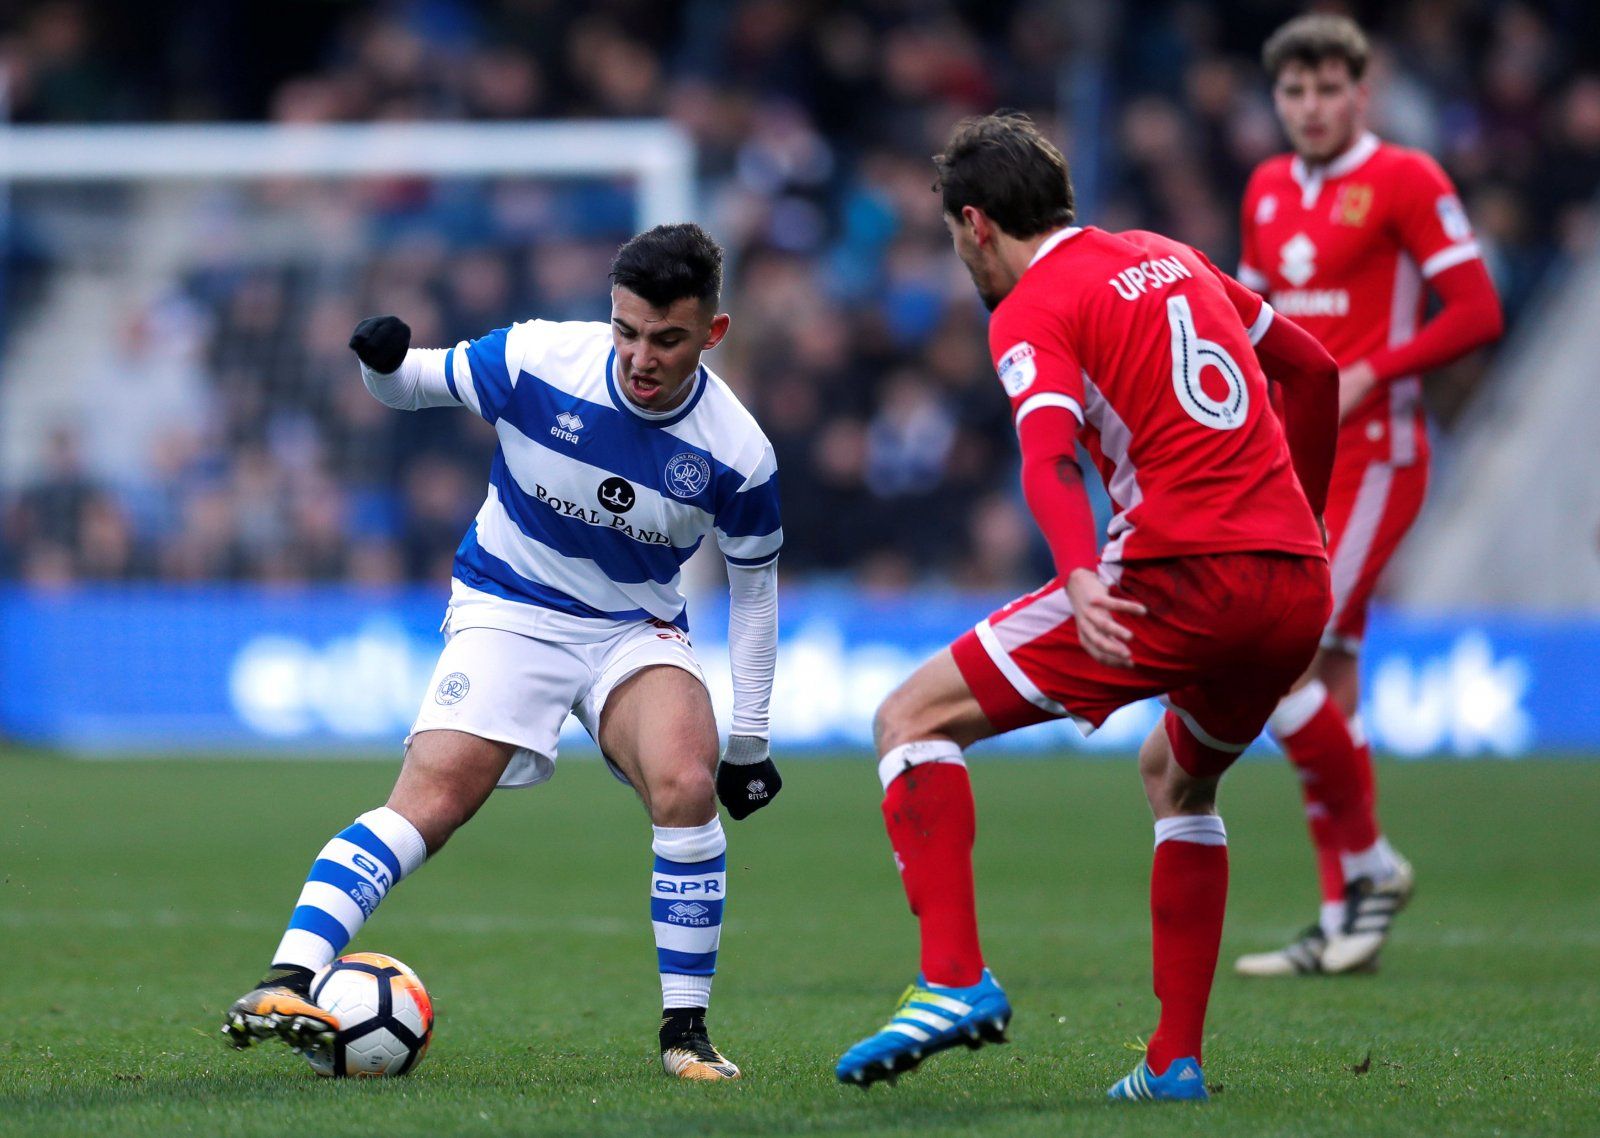 Qpr Need To Build Their 2019 2020 Squad Around Midfielder They Can